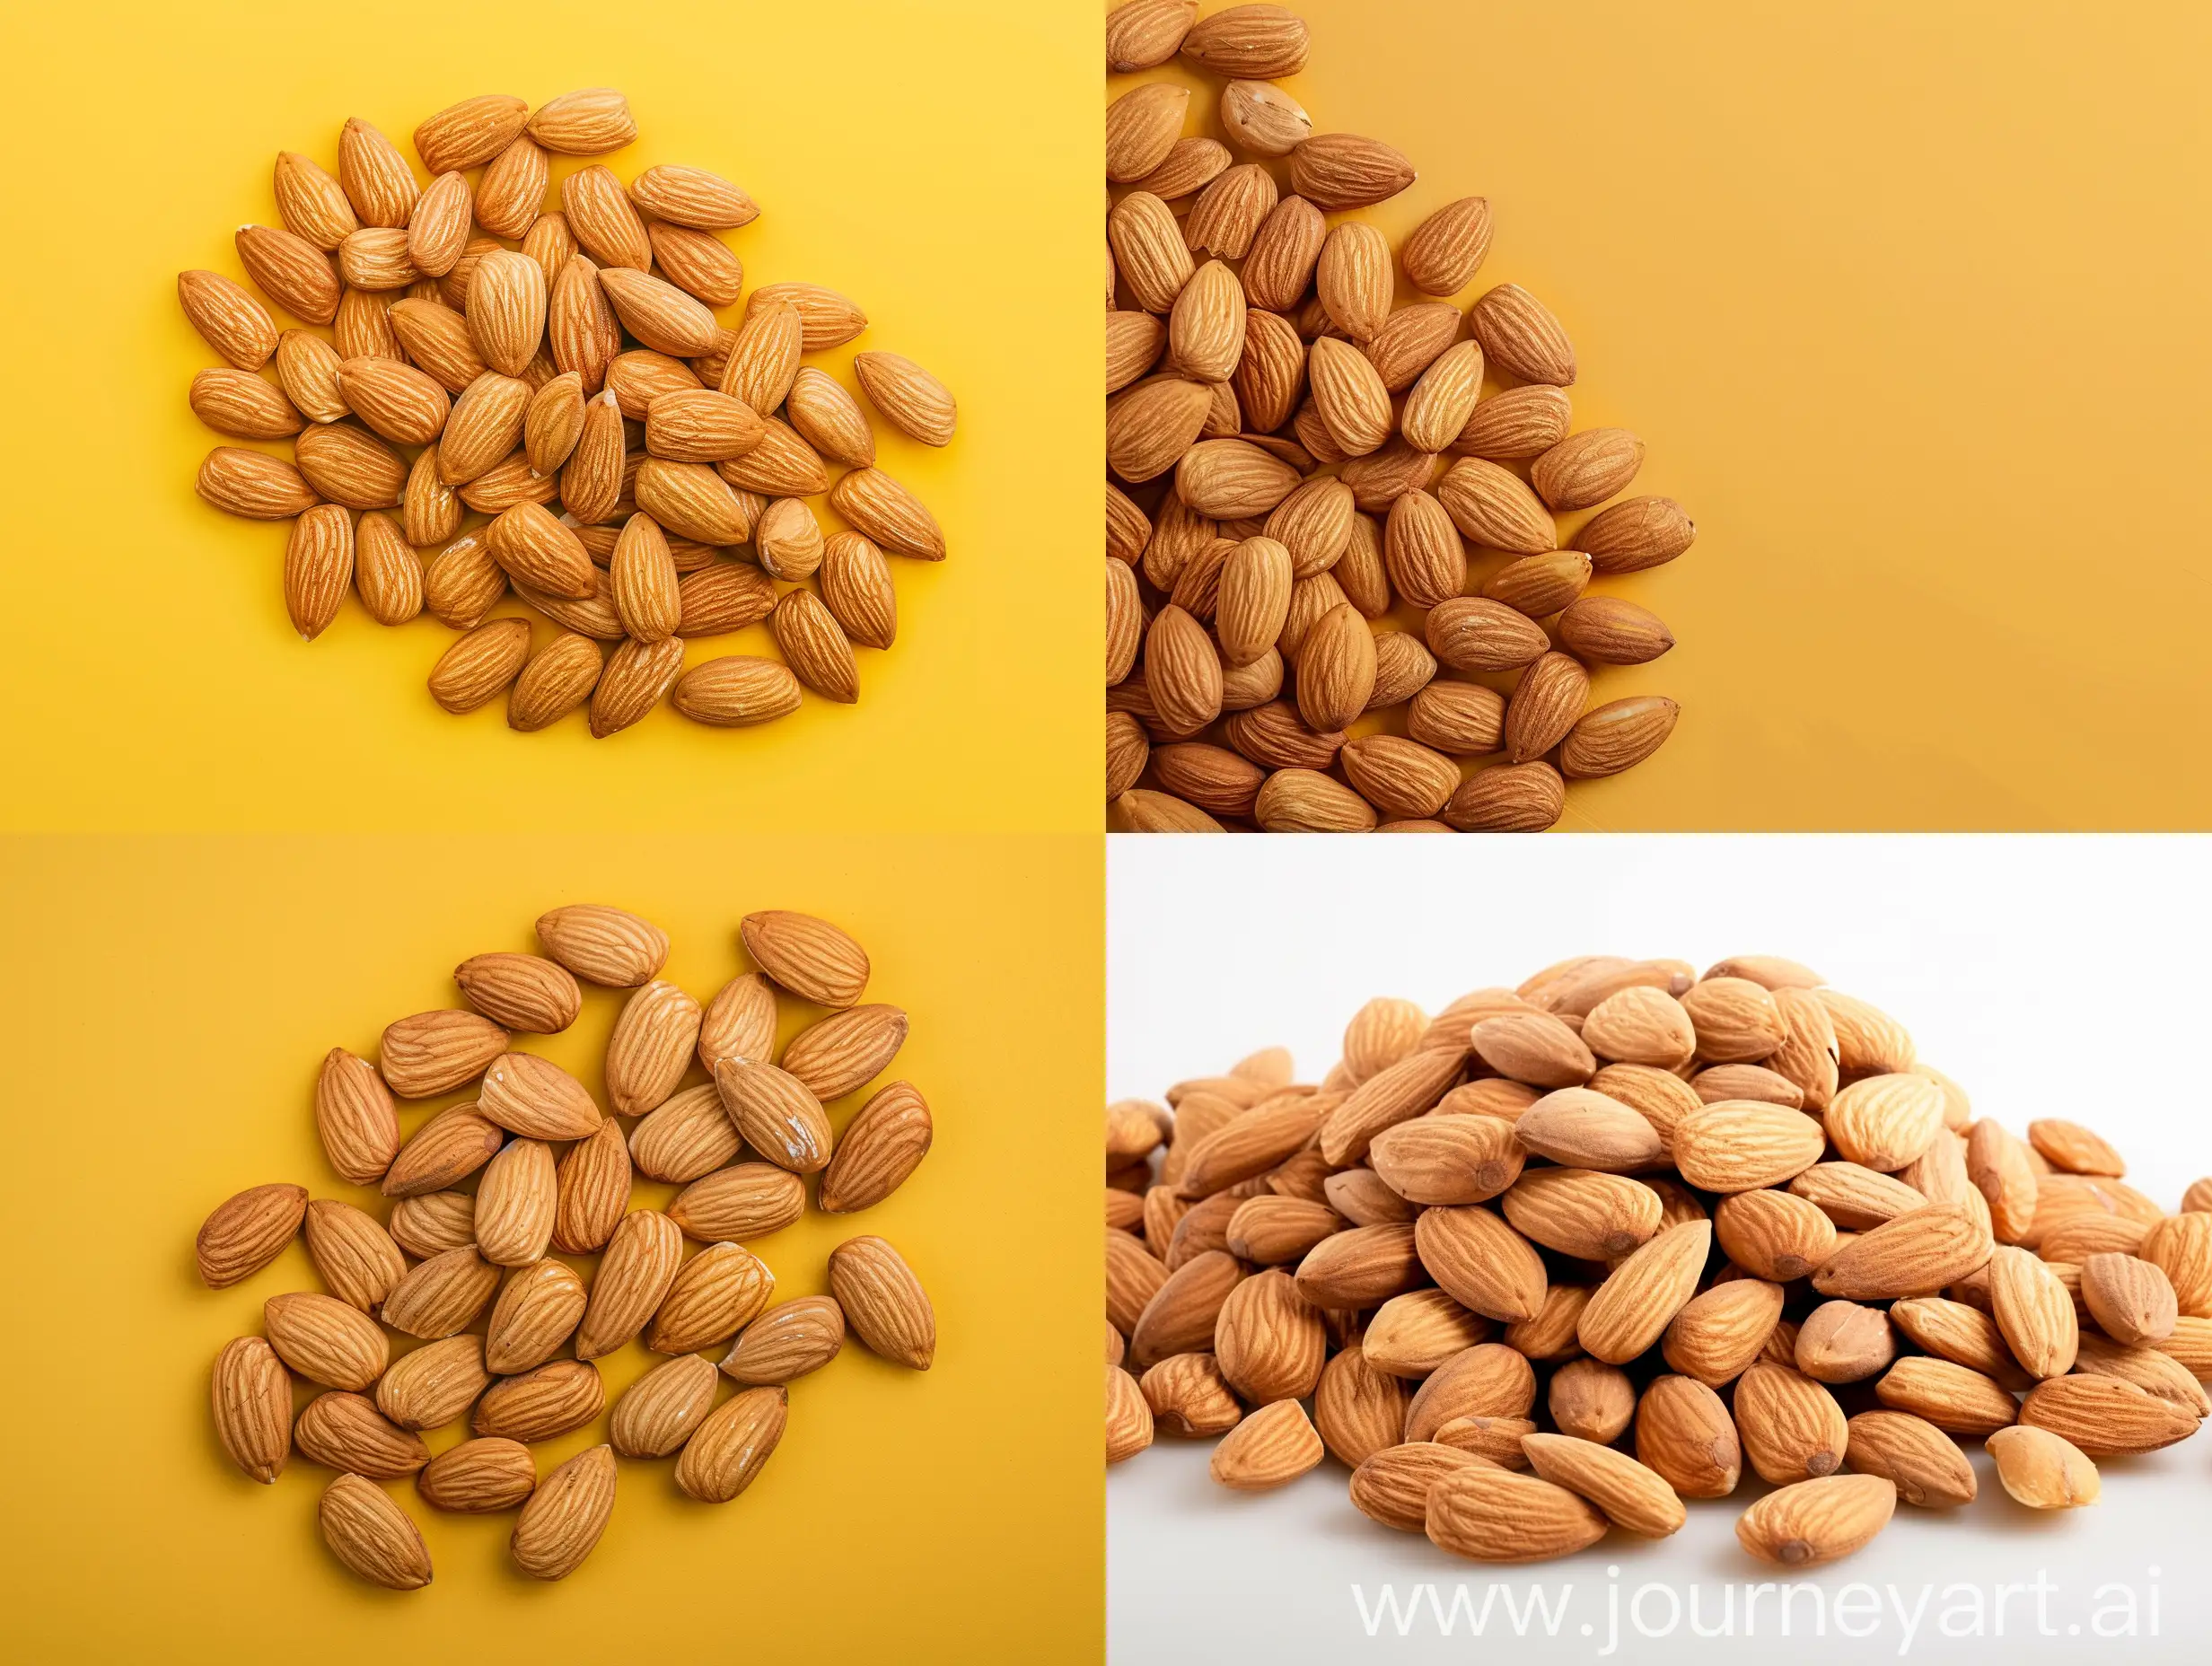 Studio photography with a background of one color of soaked almonds